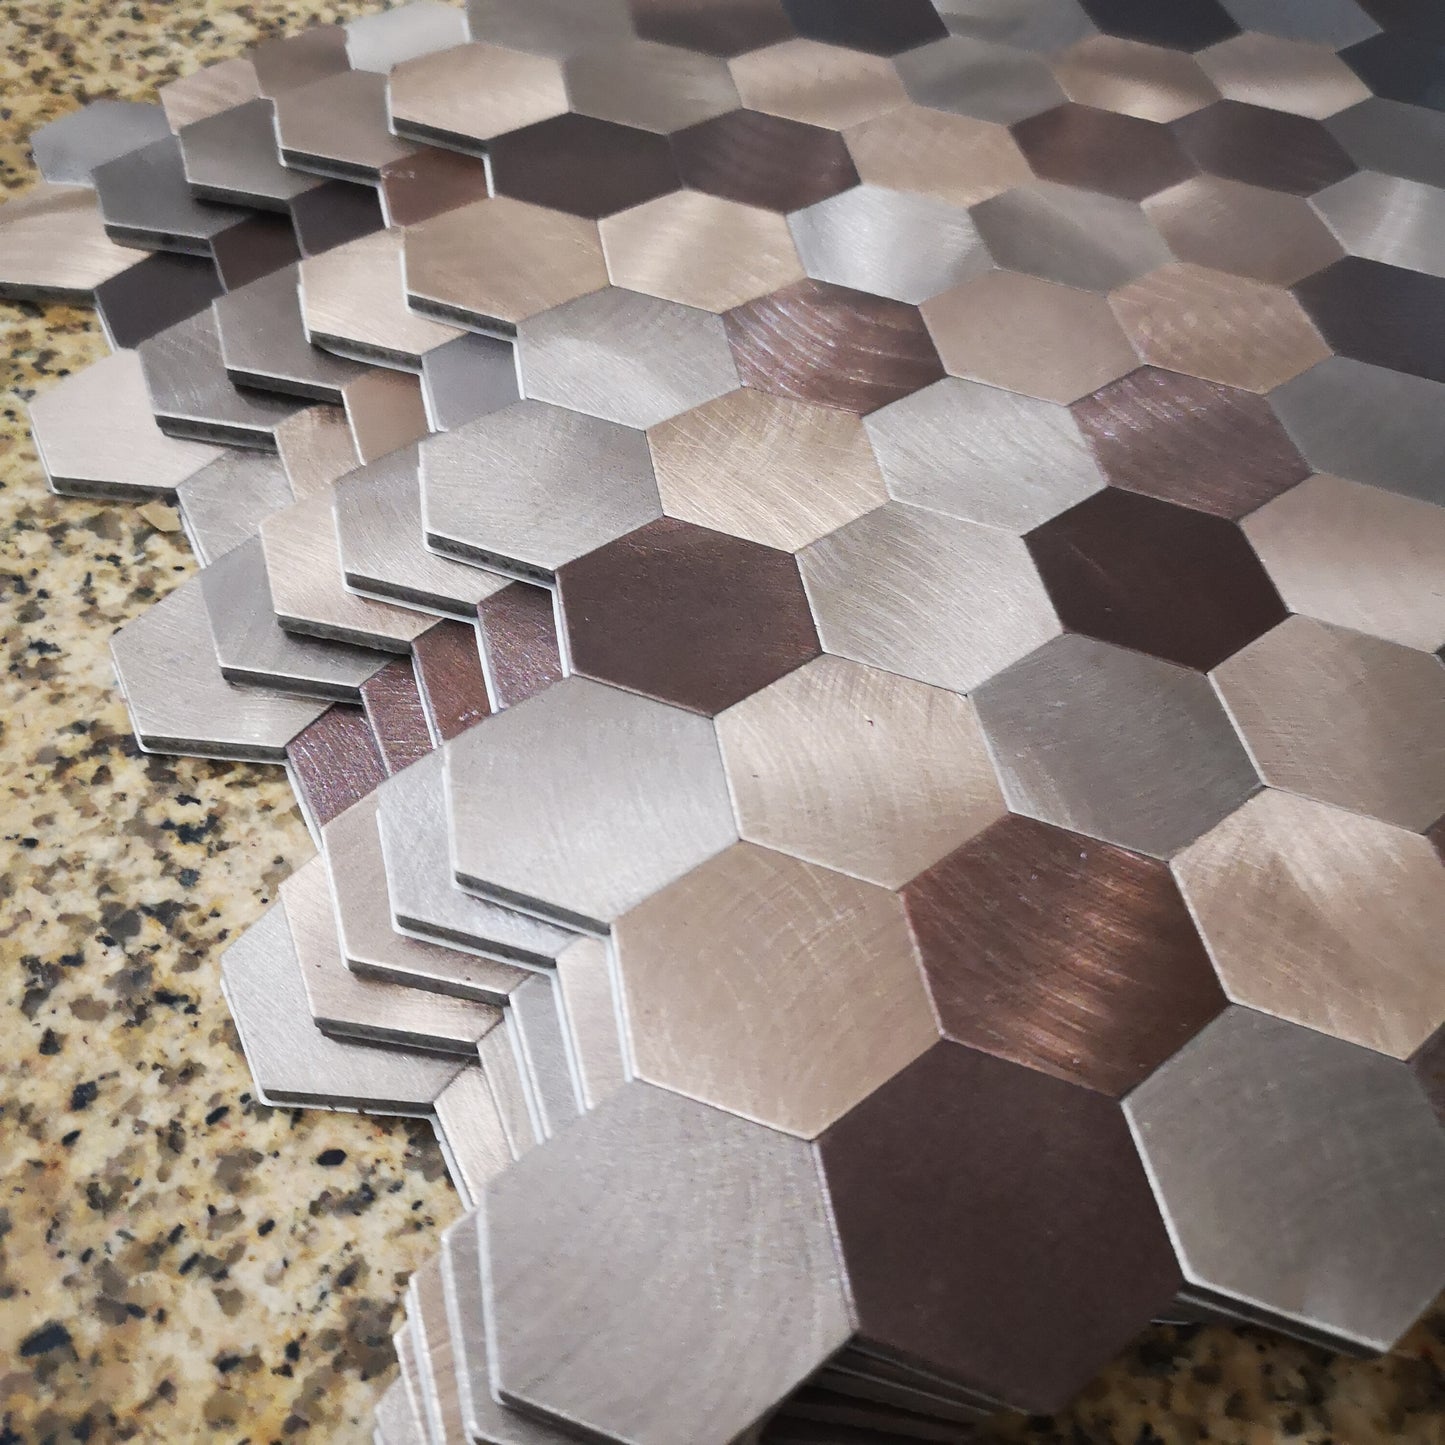 Decopus Metal Tile Peel and Stick Backsplash (Hexagon Copper Brown Muted-Gold Mixed Matted ) 12in x 12in. 4mm thick, Stick On